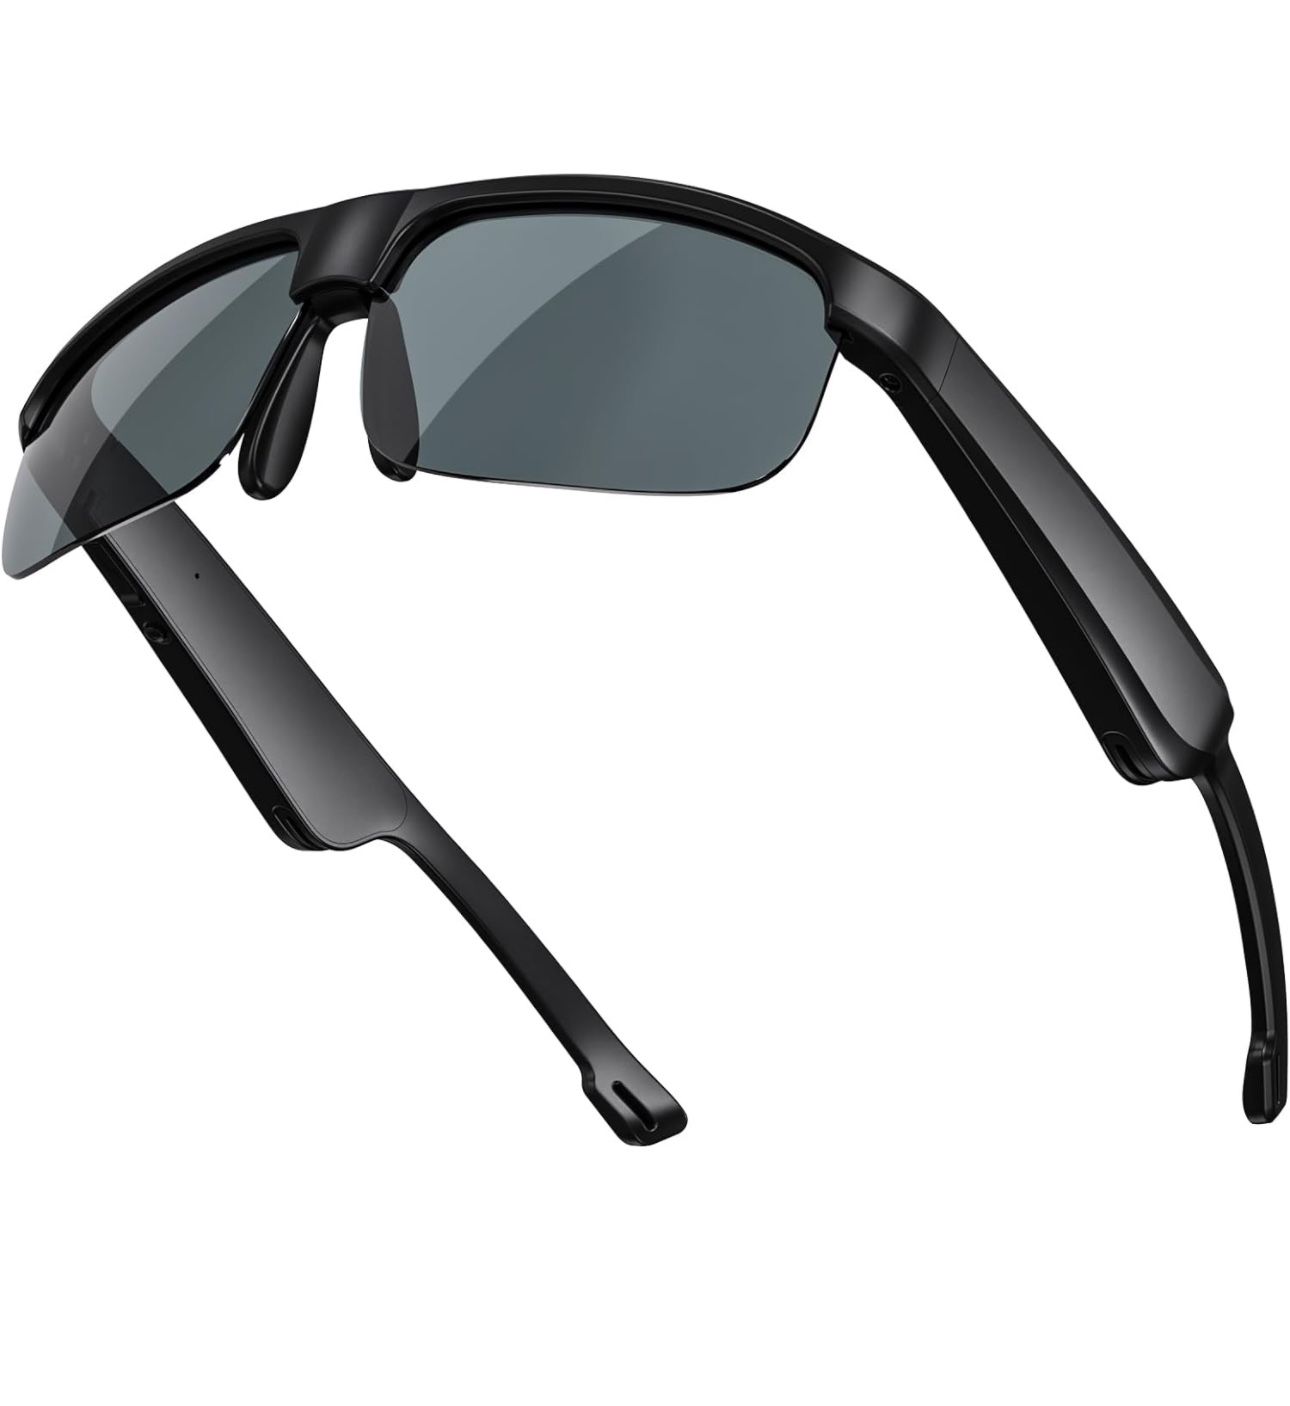 Smart Glasses, Impact Resistant Polarized Lenses, Built-in Mic & Speakers, Outdoor UV Protection & Voice Assistant 8hr Long Lasting Battery